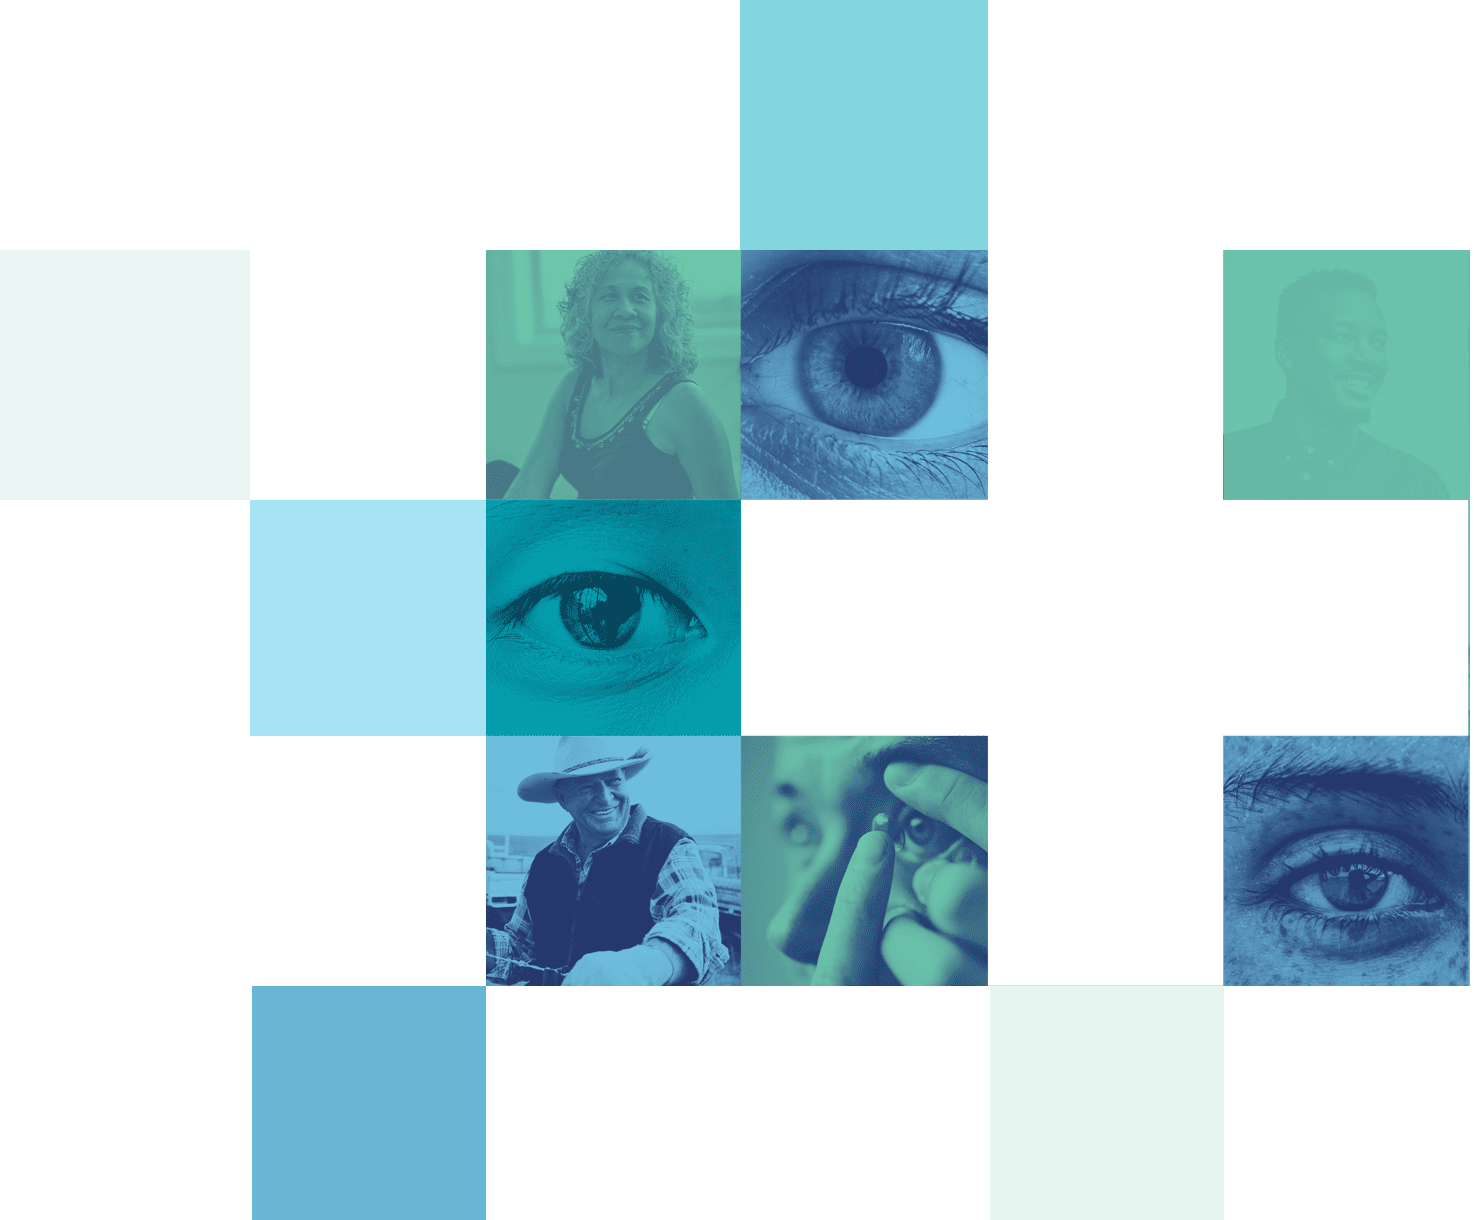 Tile collage of eyes and eye care patients who use Bausch and Lomb eye care products